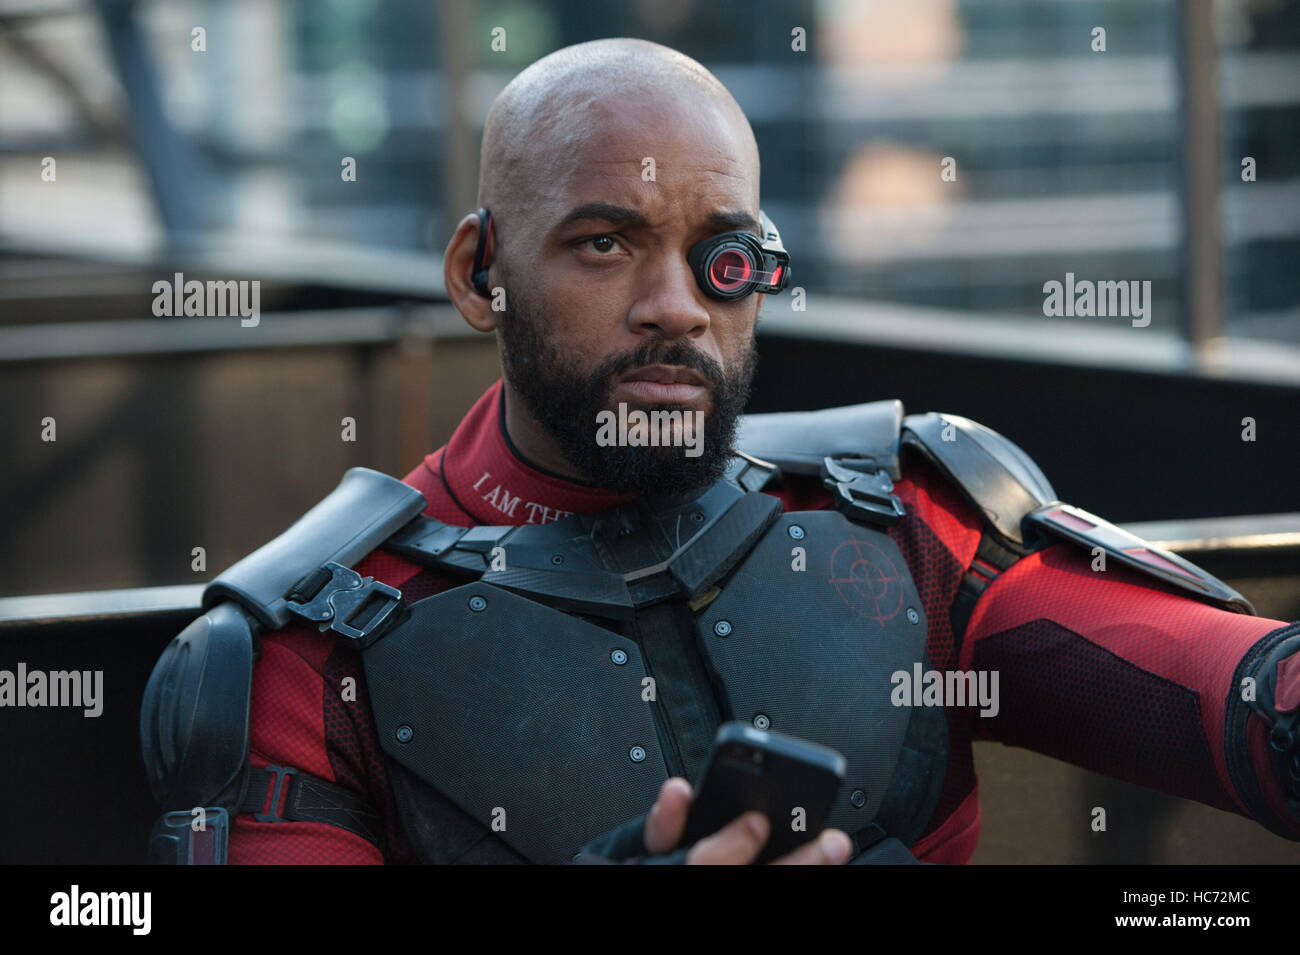 RELEASE DATE: August 5, 2016 TITLE: Suicide Squad STUDIO: Atlas Entertainment DIRECTOR: David Ayer PLOT: A secret government agency recruits imprisoned supervillains to execute dangerous black ops missions in exchange for clemency STARRING: Will Smith as Deadshot  (Credit Image: c Atlas Entertainment/Entertainment Pictures/) Stock Photo